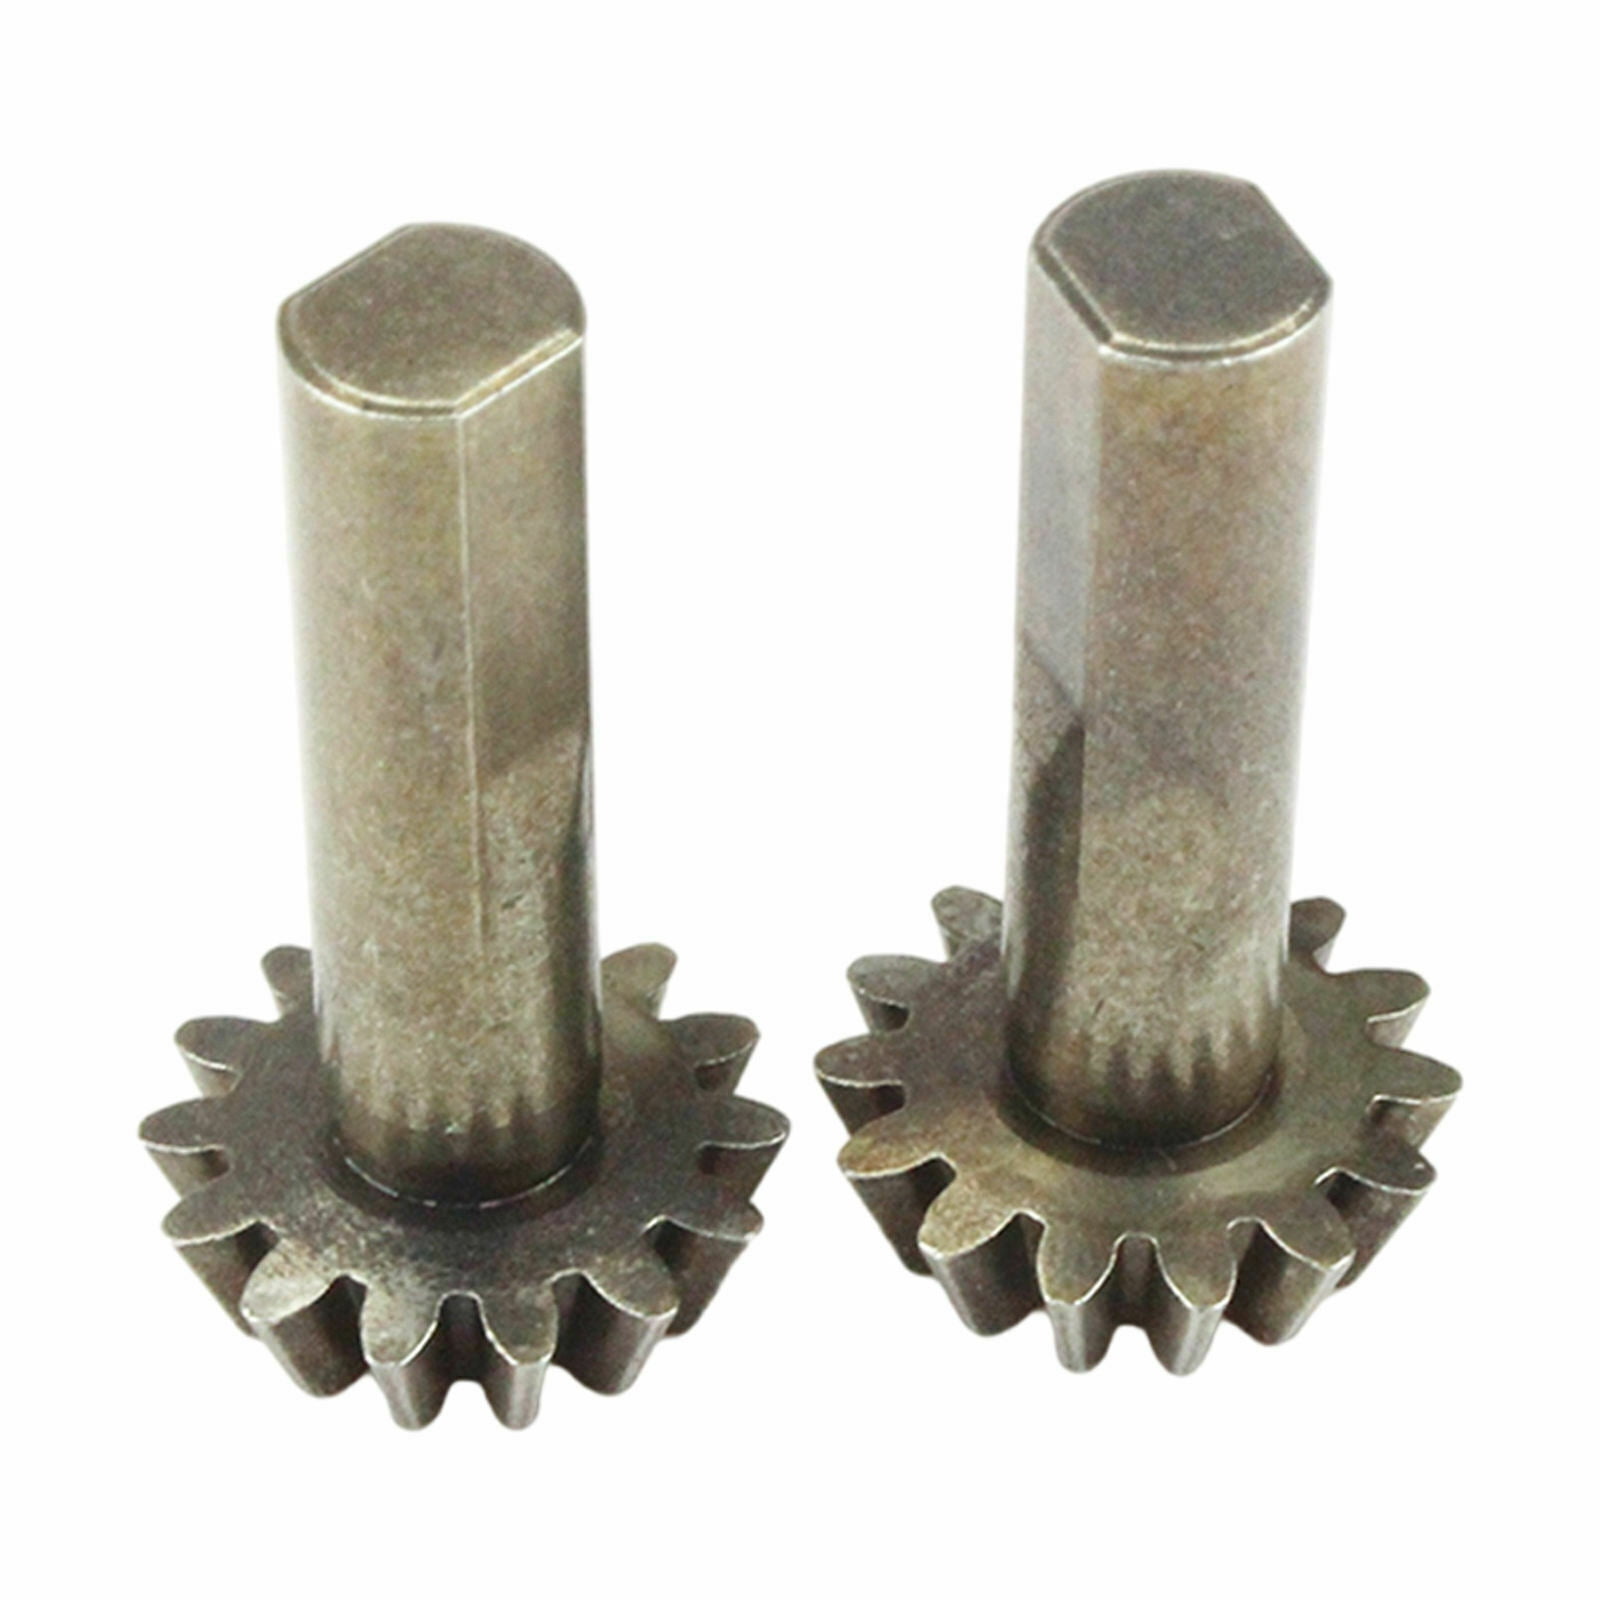 2Pack 1/10 RC Car Bevel Gear for WLtoys 104001 2.4G High Speed Racing Car Model